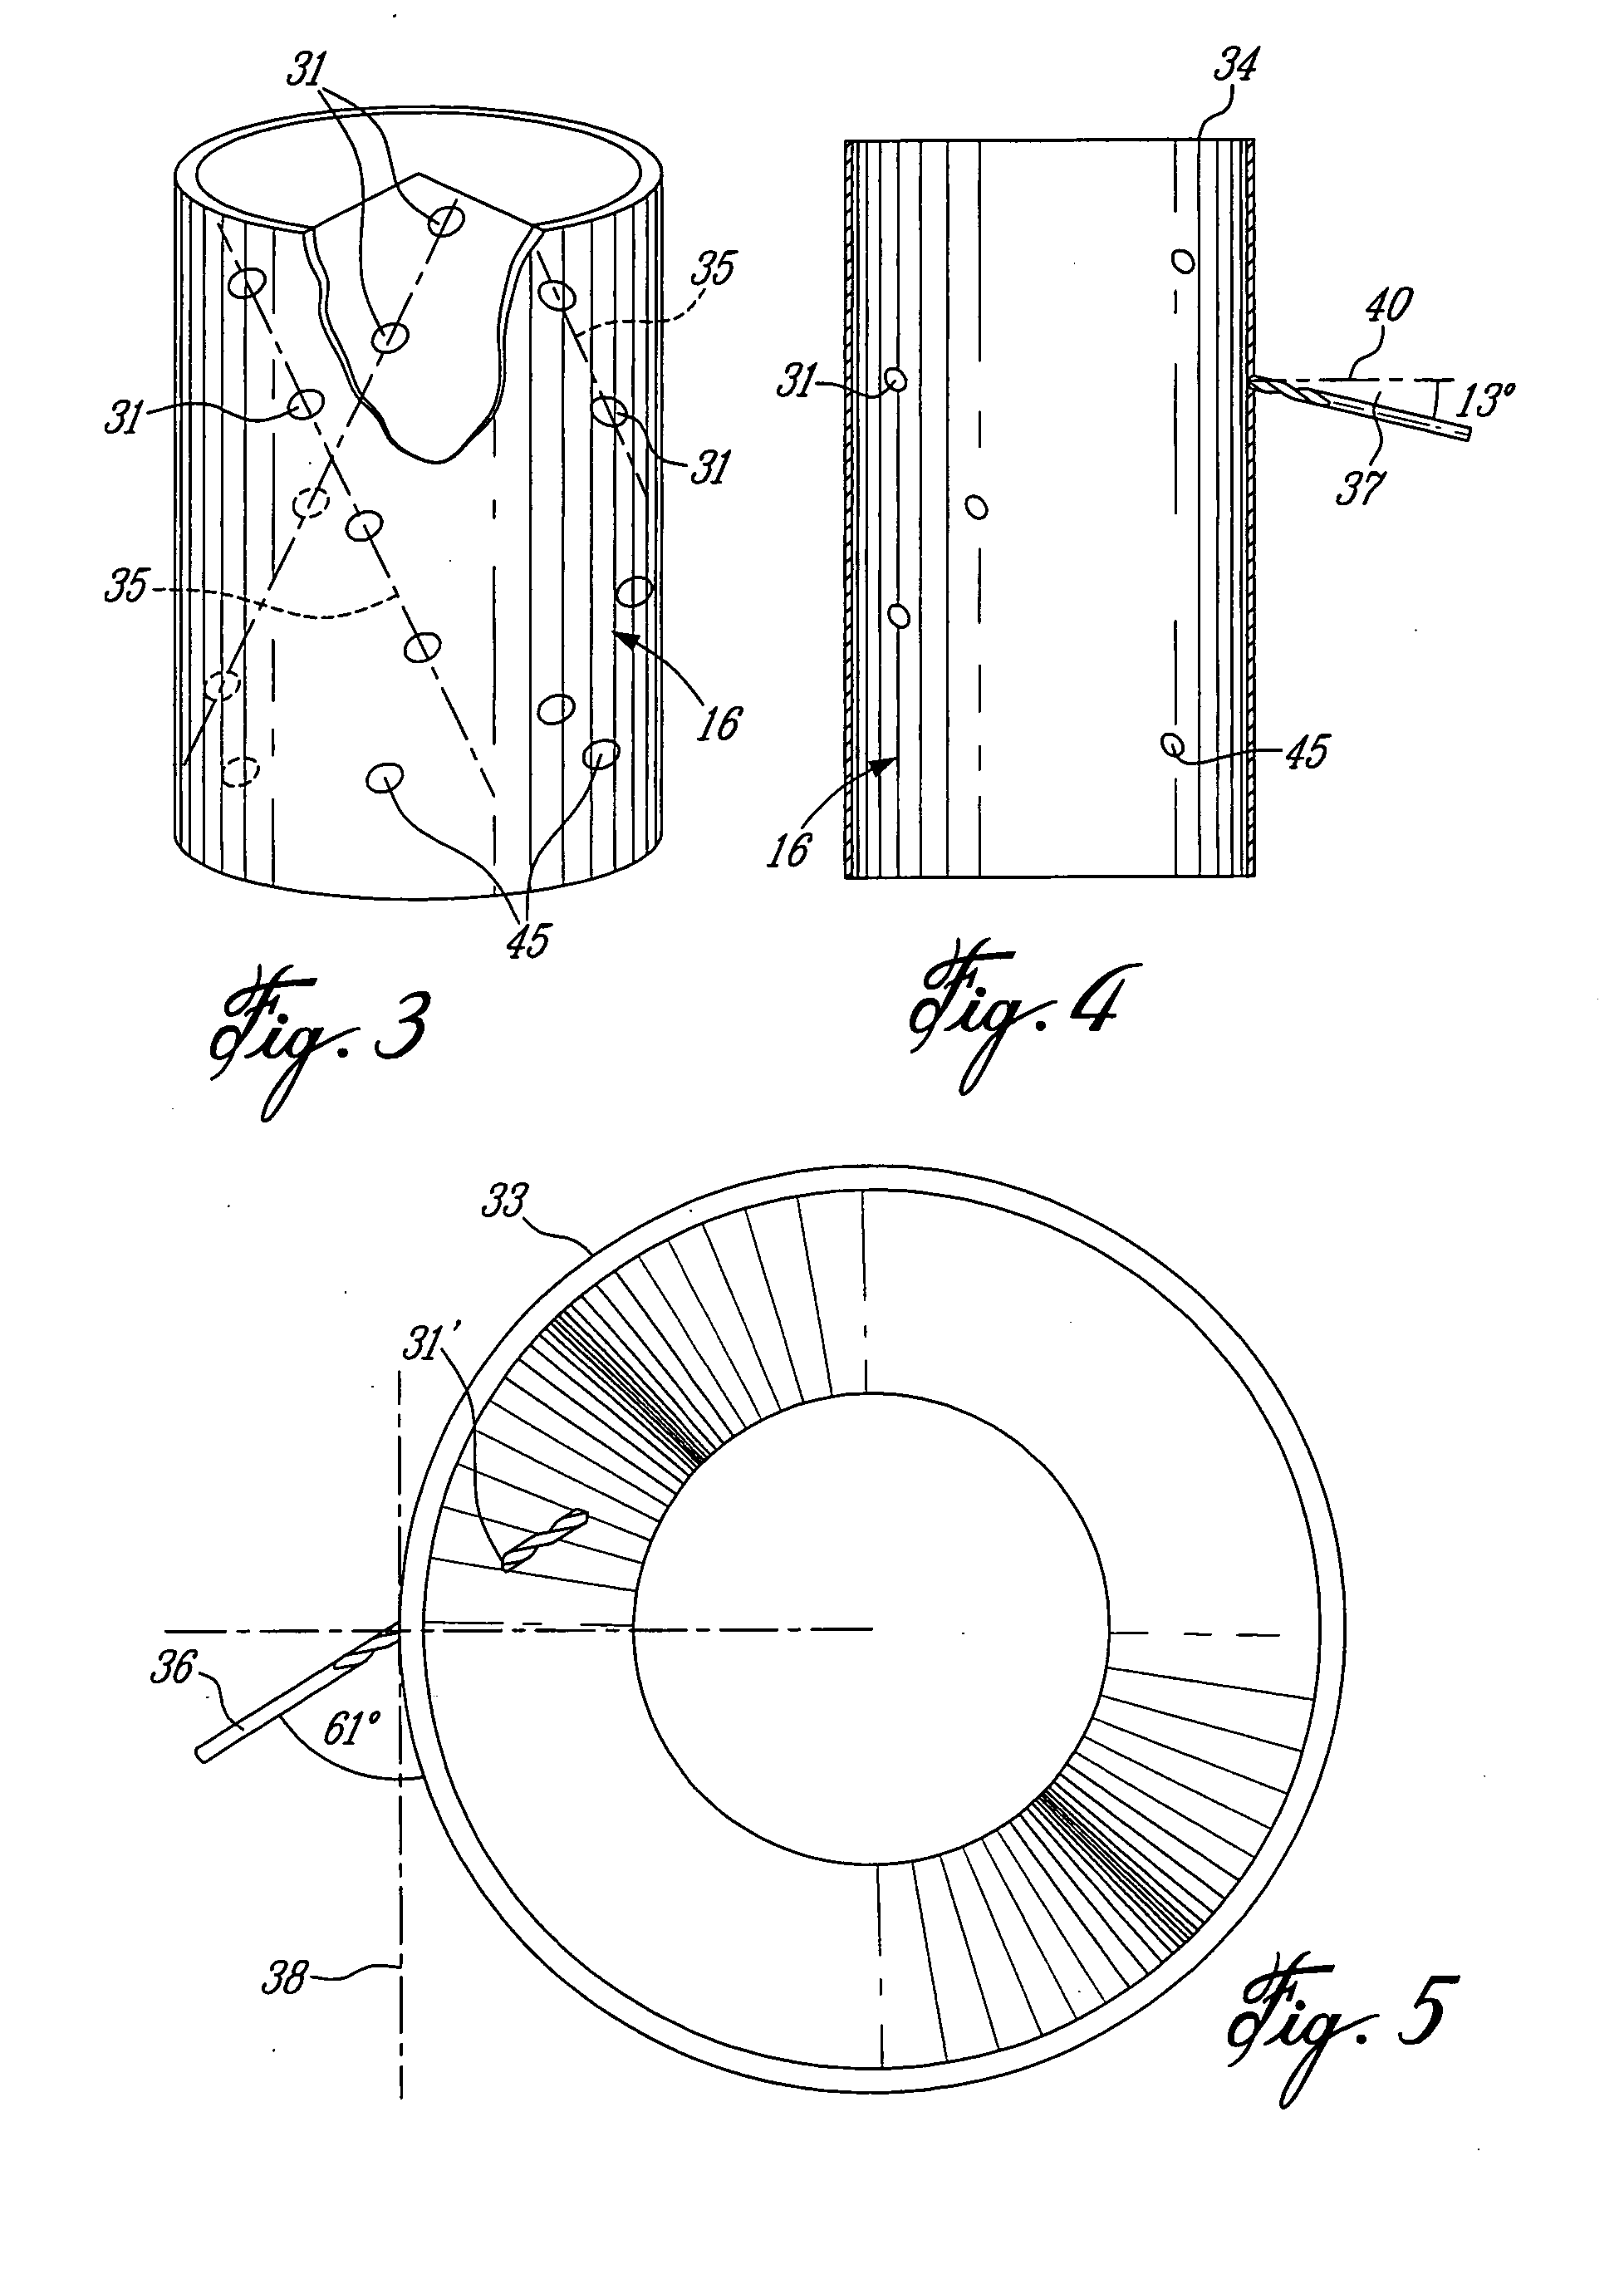 High efficiency cyclone gasifying combustion burner and method